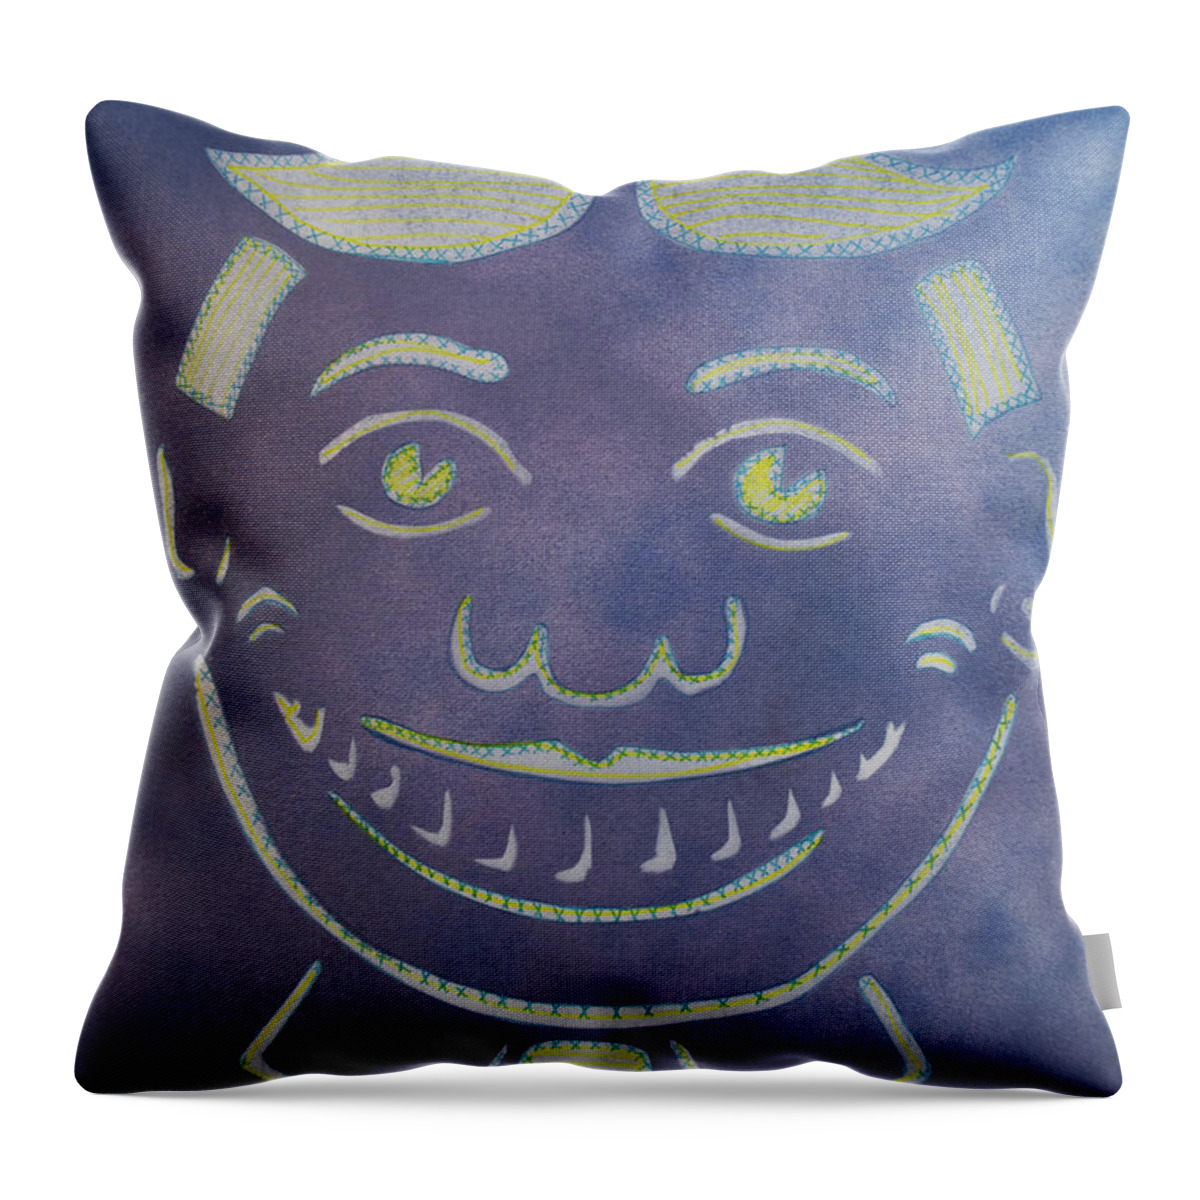 Tillie Of Asbury Park Throw Pillow featuring the painting Stitches Tillie by Patricia Arroyo